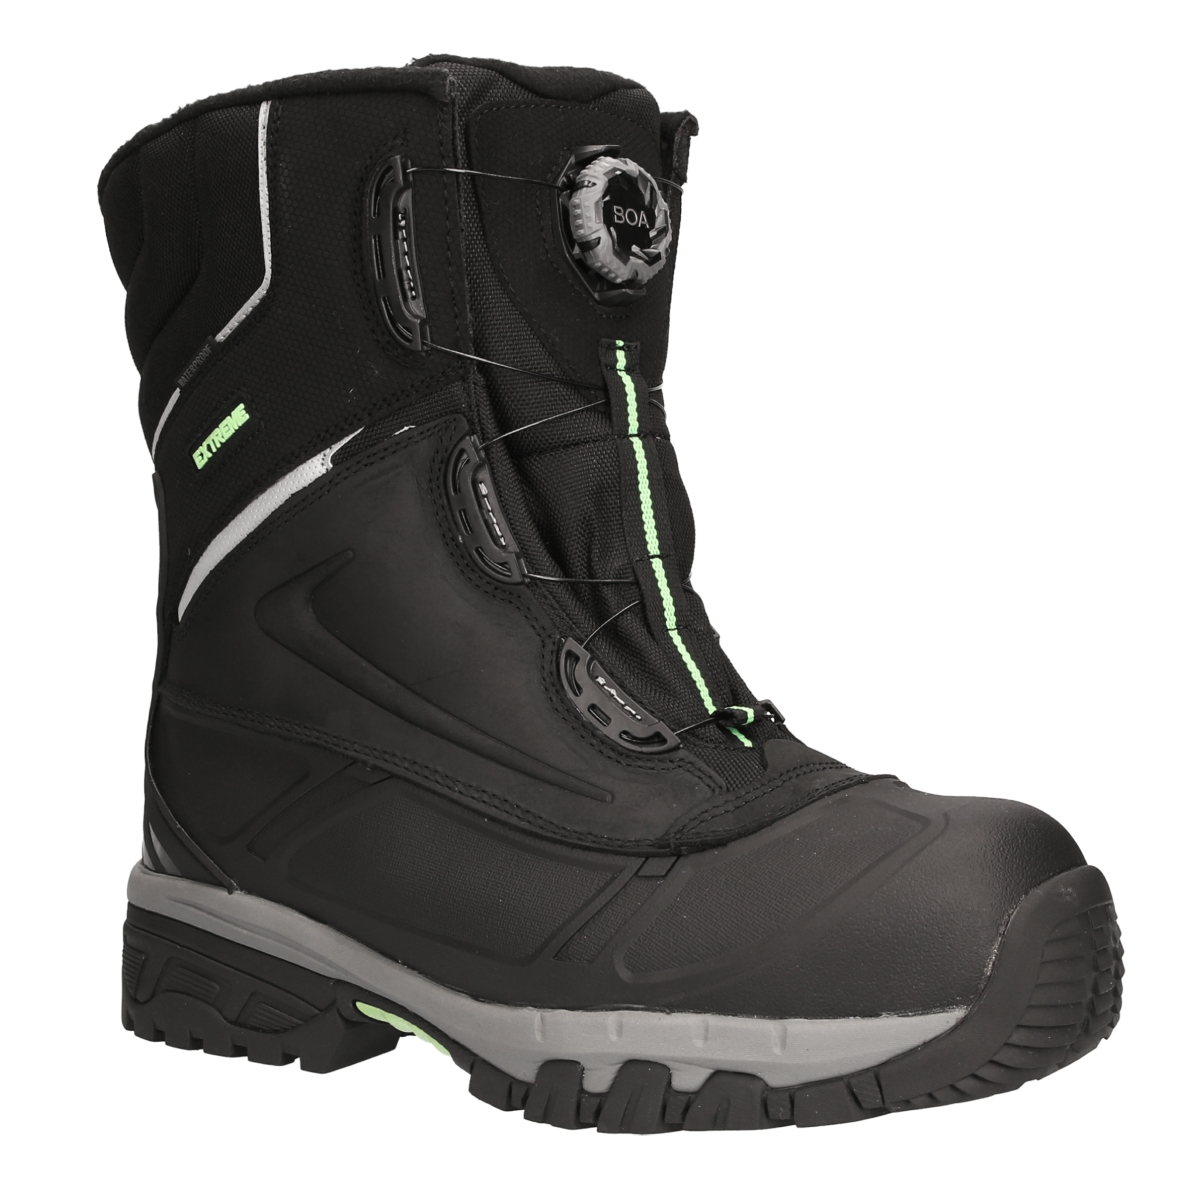 Men's Waterproof Anti-Slip Extreme Pac Boots with Boa Fit System For Lacing - Black